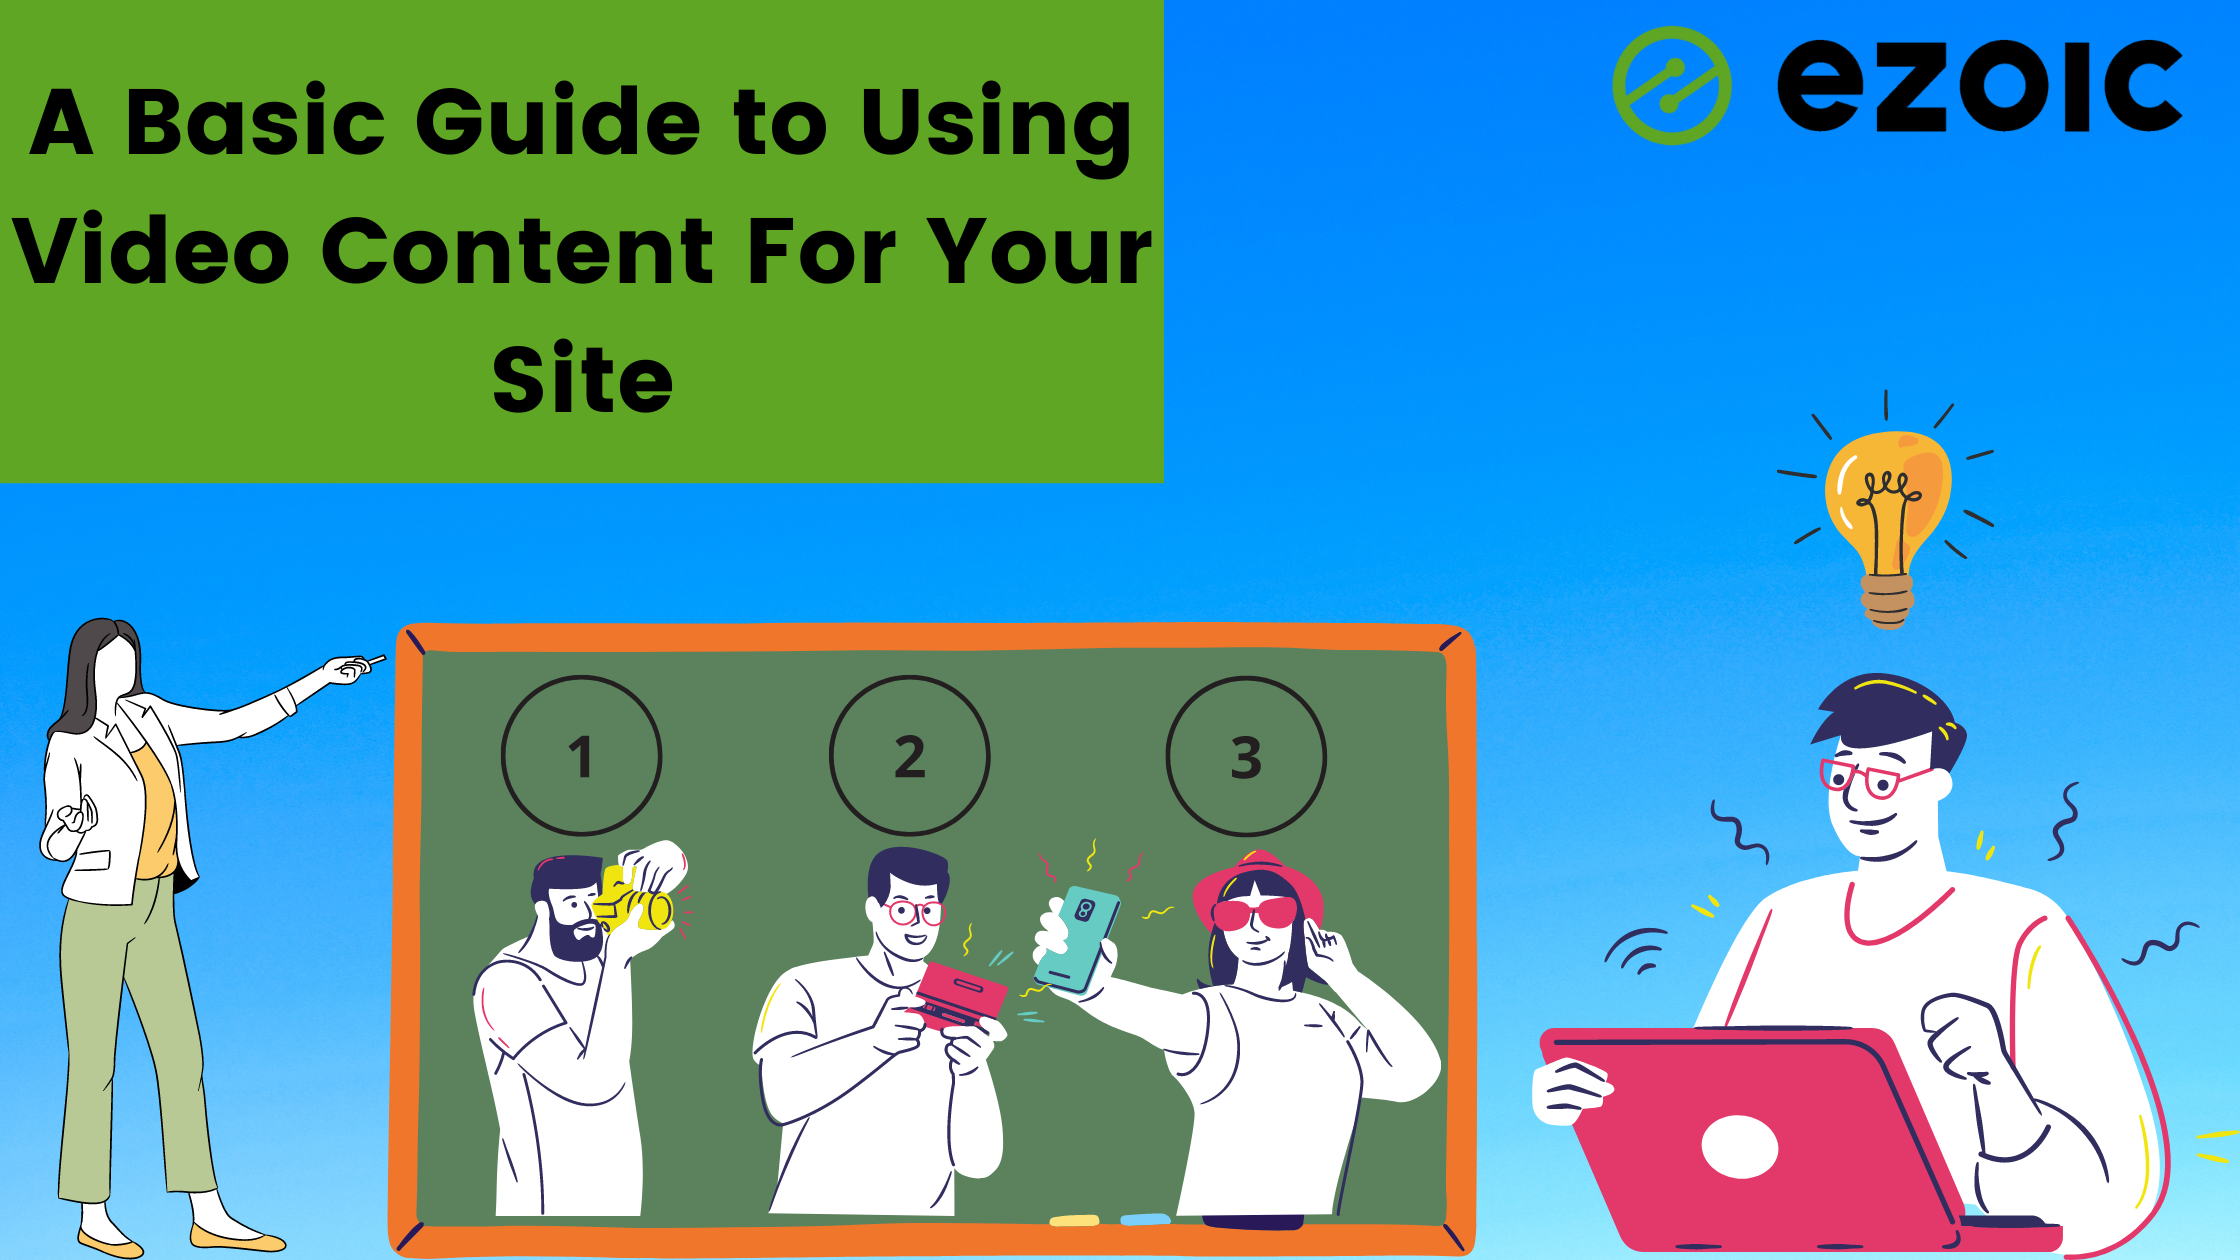 A Basic Guide to Using Video Content For Your Site